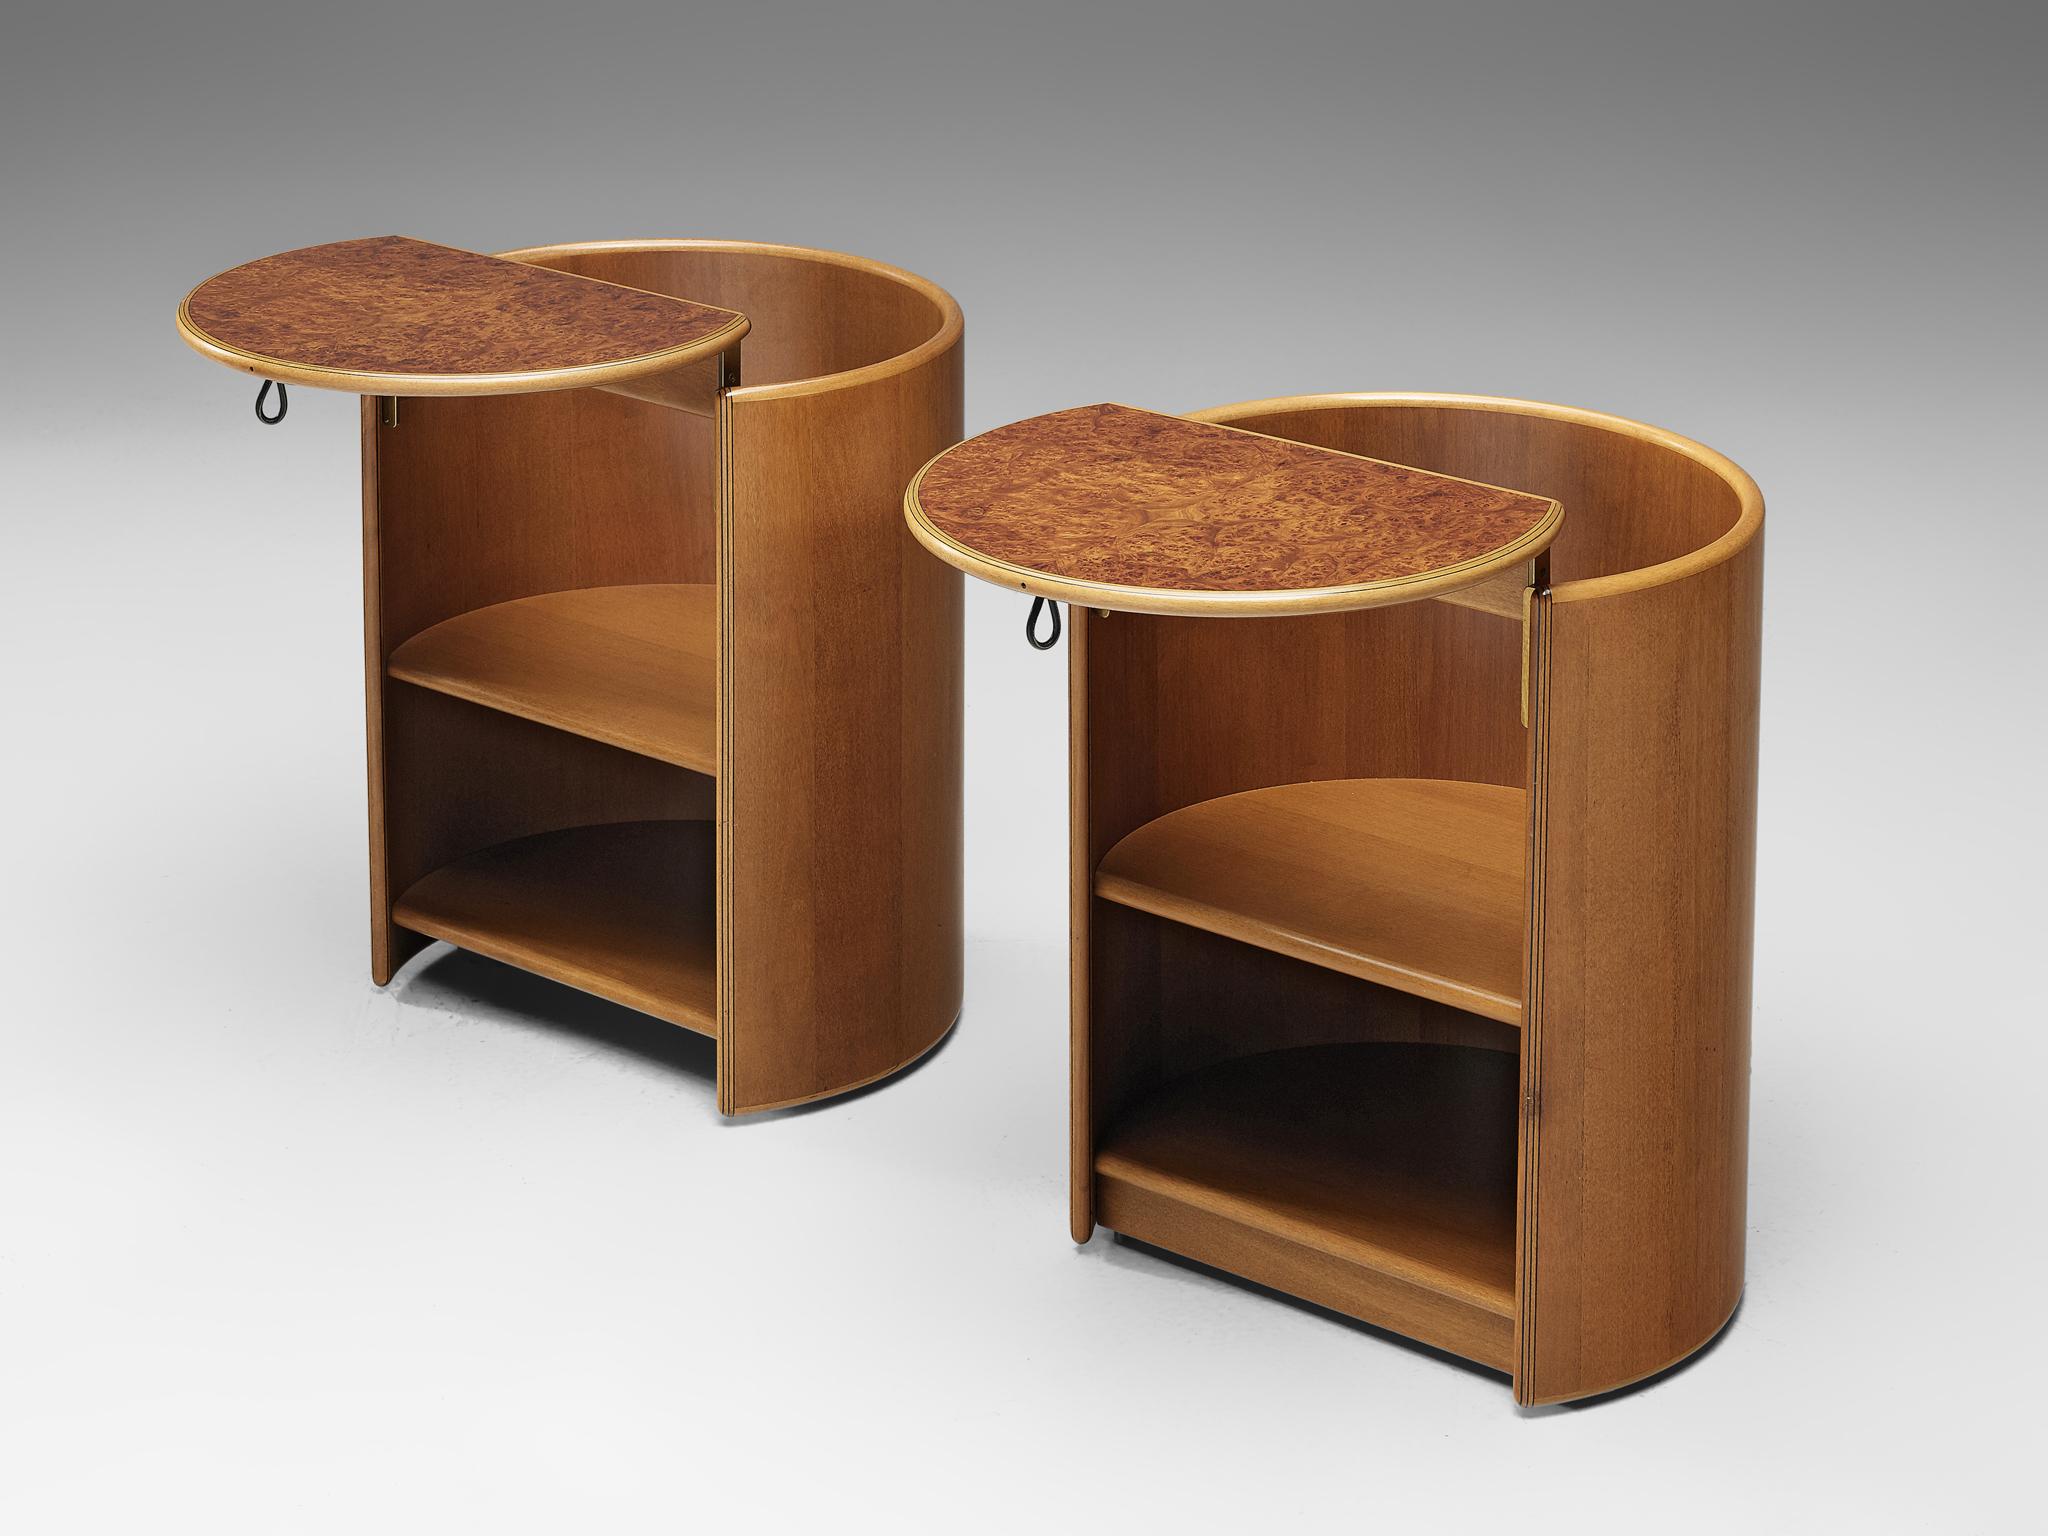 Afra & Tobia Scarpa for Maxalto, pair of side tables, walnut, burl, ebonized wood and brass, Italy, 1975

A pair of night stands by Afra and Tobias Scarpa for Maxalto. The nightstands feature a flip-top to turn the pieces in side tables. The